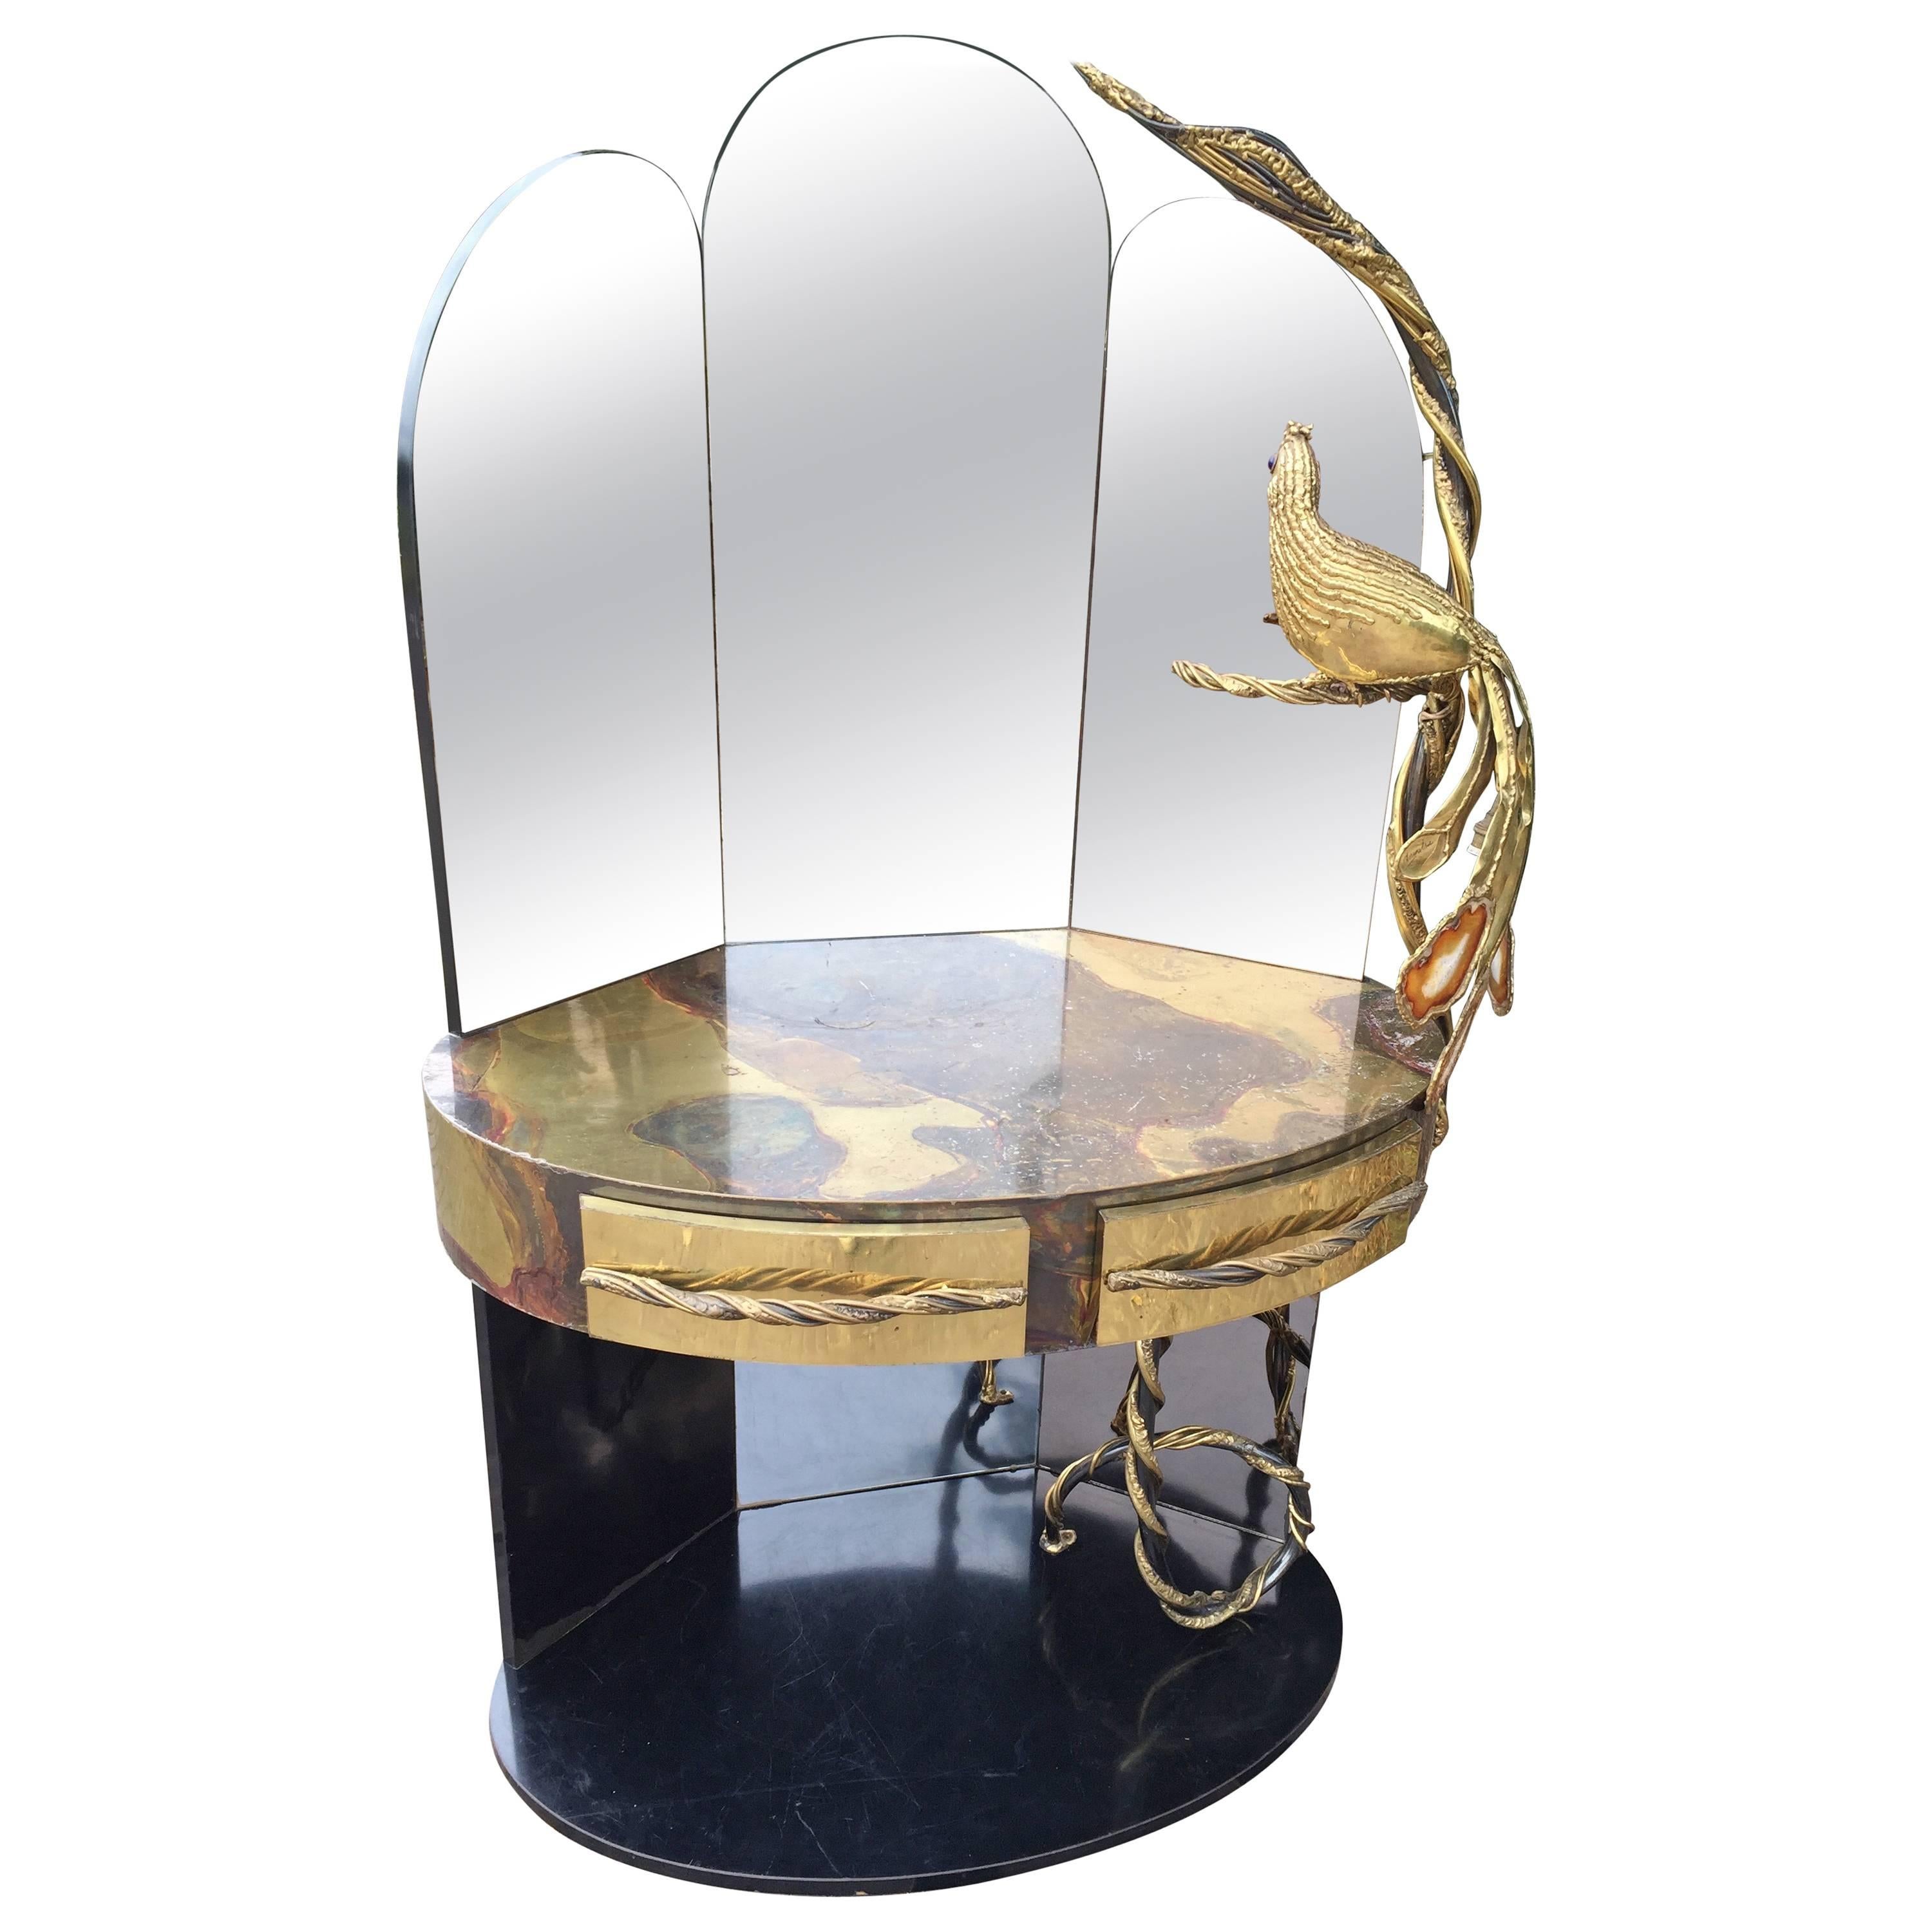 Rare Isabelle Masson Faure Vanity Dressing table with Peacock Lighting Sculpture